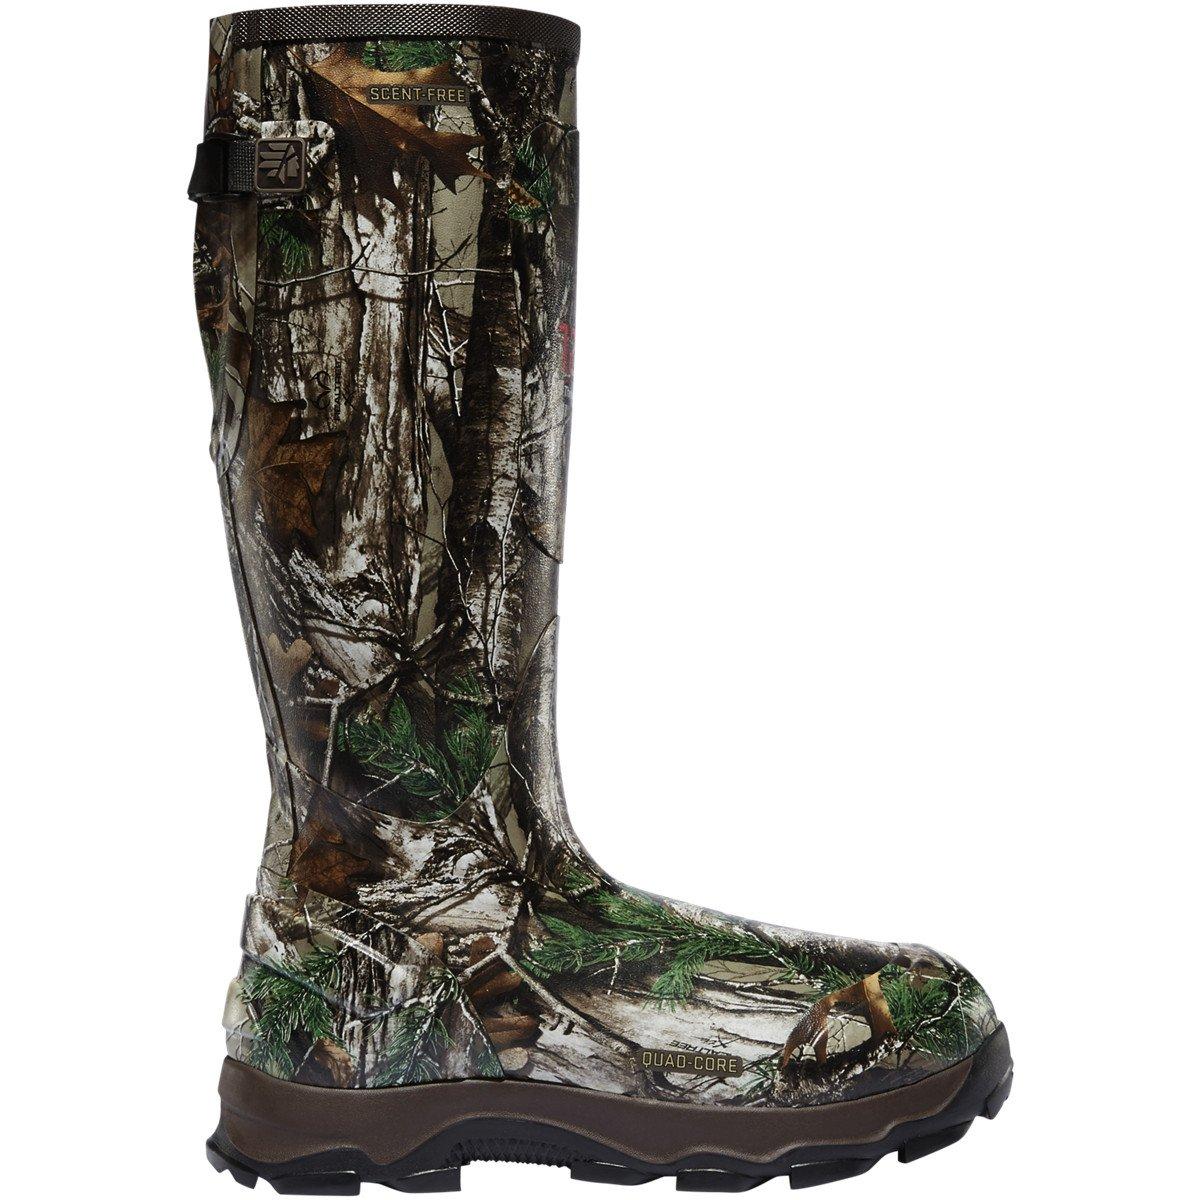 Lacrosse 4XBurly Rubber Boots in Realtree Xtra